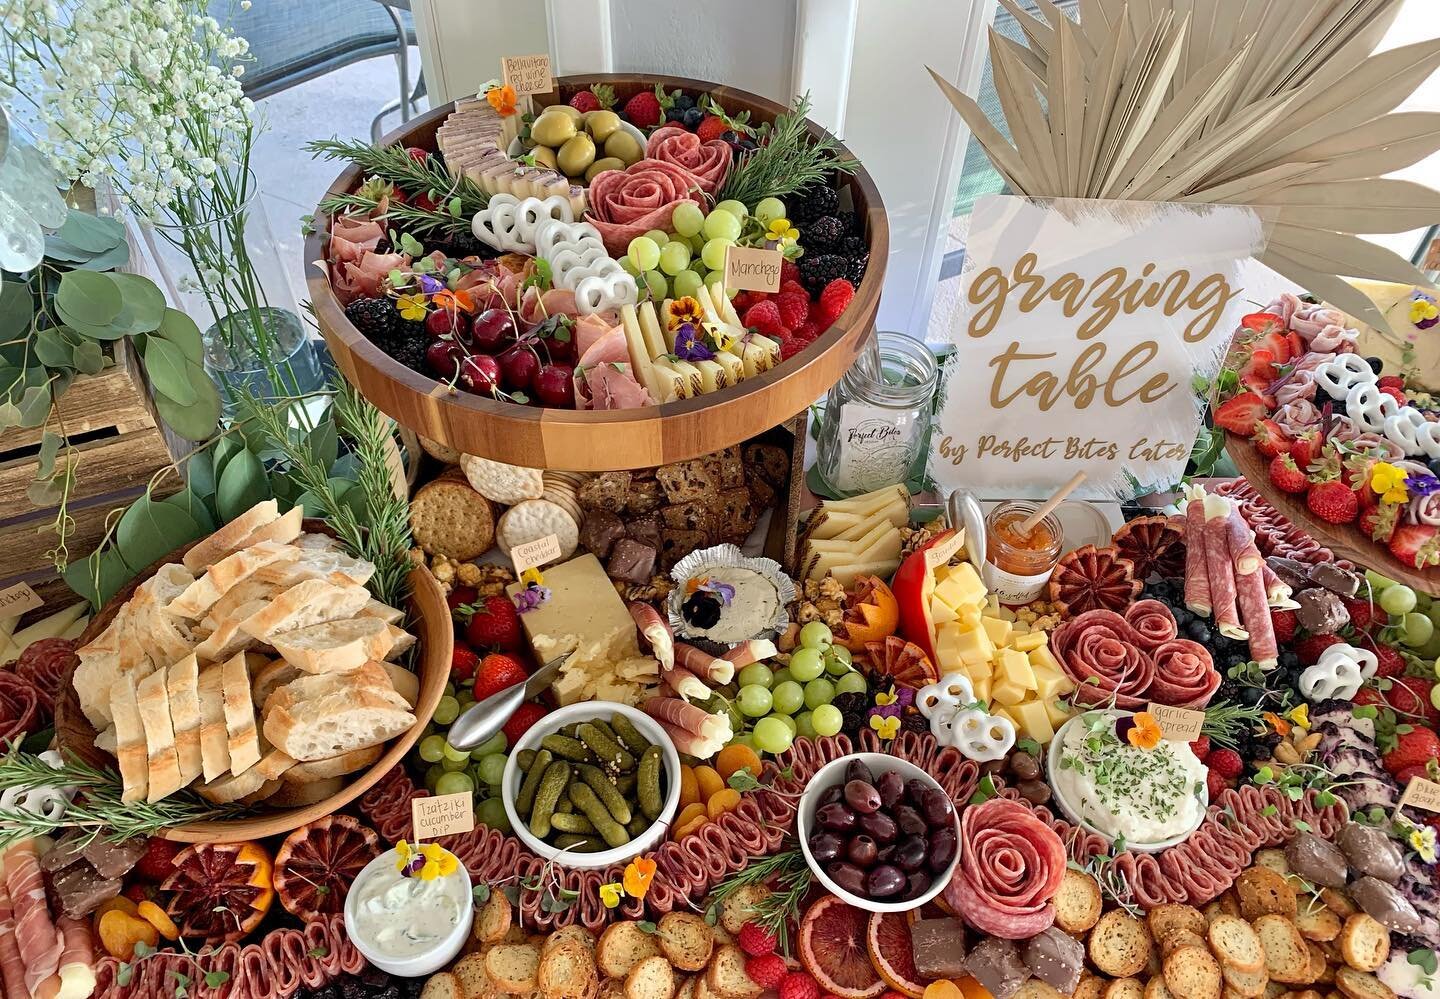 Book a grazing table for your next event✨
.
.
.
.
.
.
.
#PerfectBitesCater #charcuteriecups #charcuteriecones  #cheese #cheesebox #charcuterie #wedding #events #drivebybirthday #cateringevent #foodart #foodartist #eatpretty #prettyfood #supportlocals